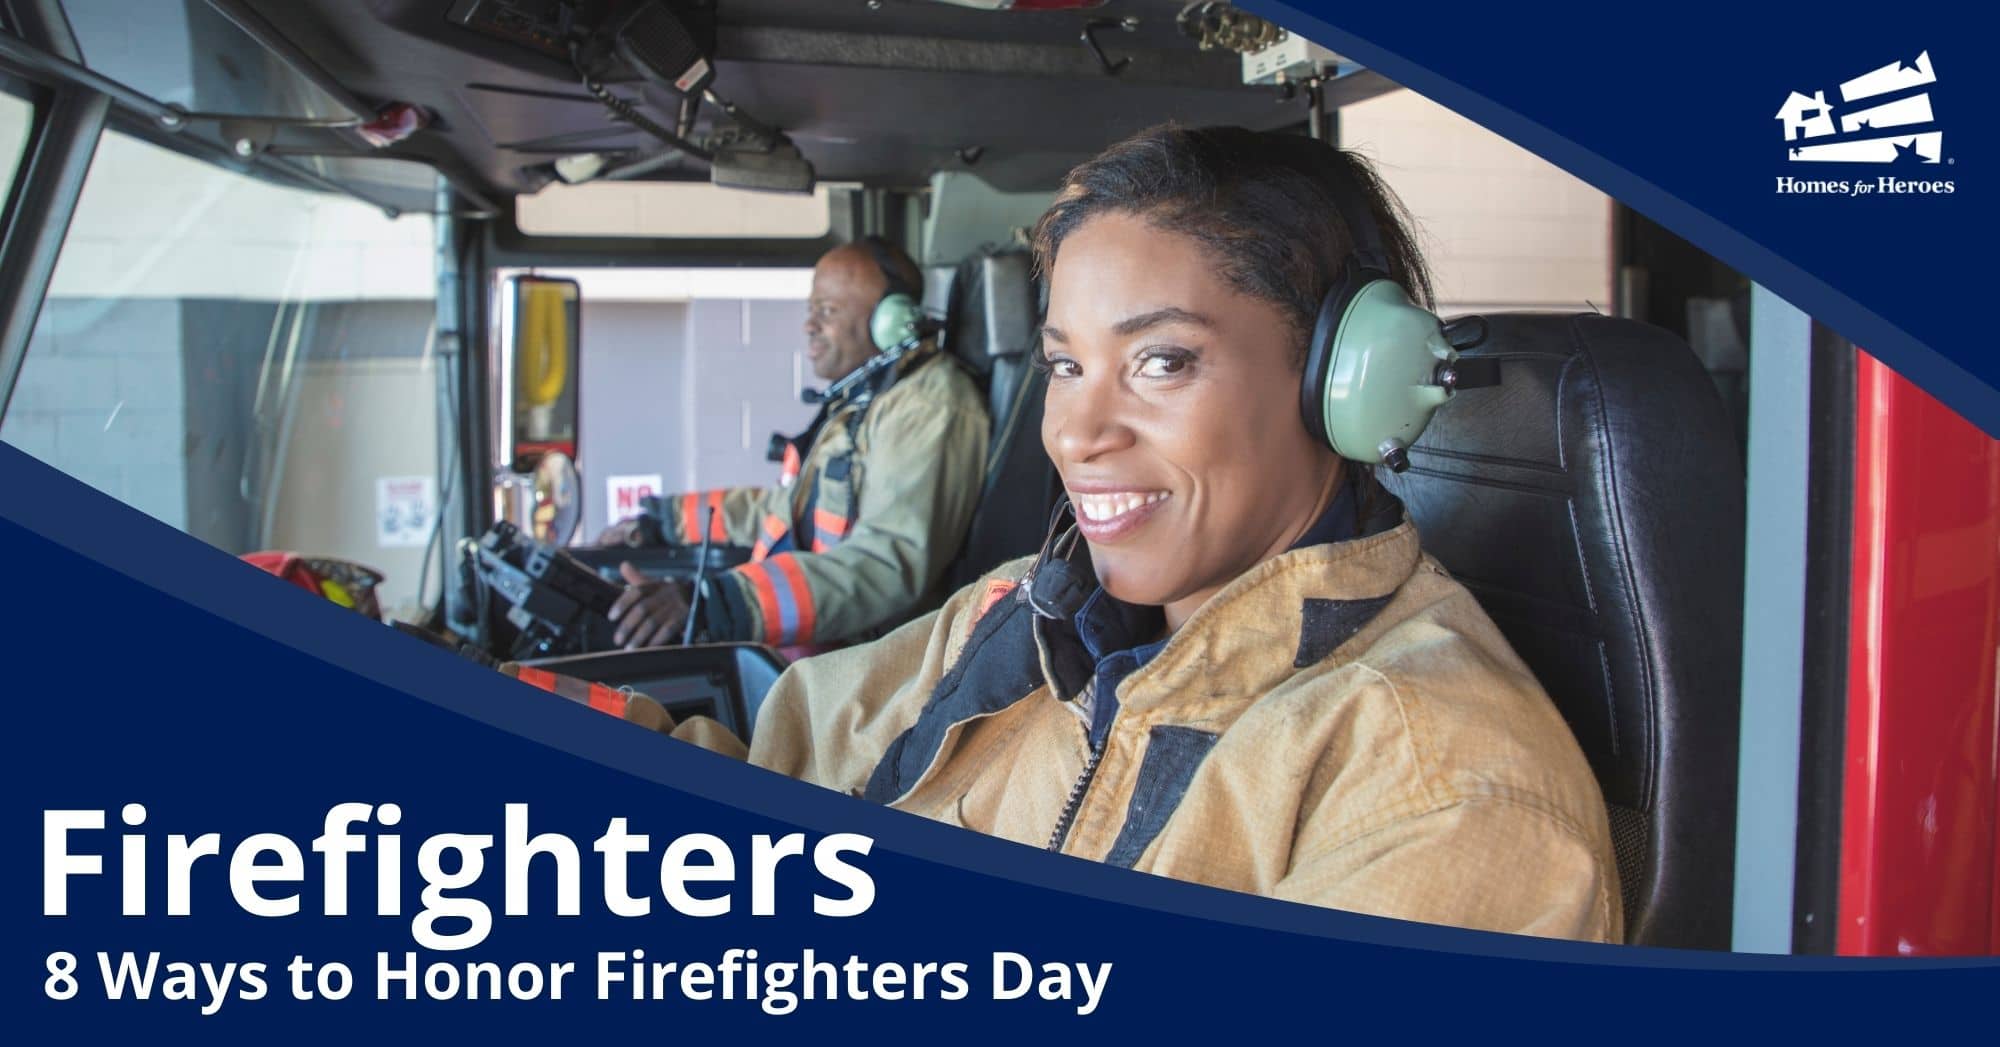 Two Firefighters in Fire Truck Wearing Headphones International Firefighters Day Homes for Heroes